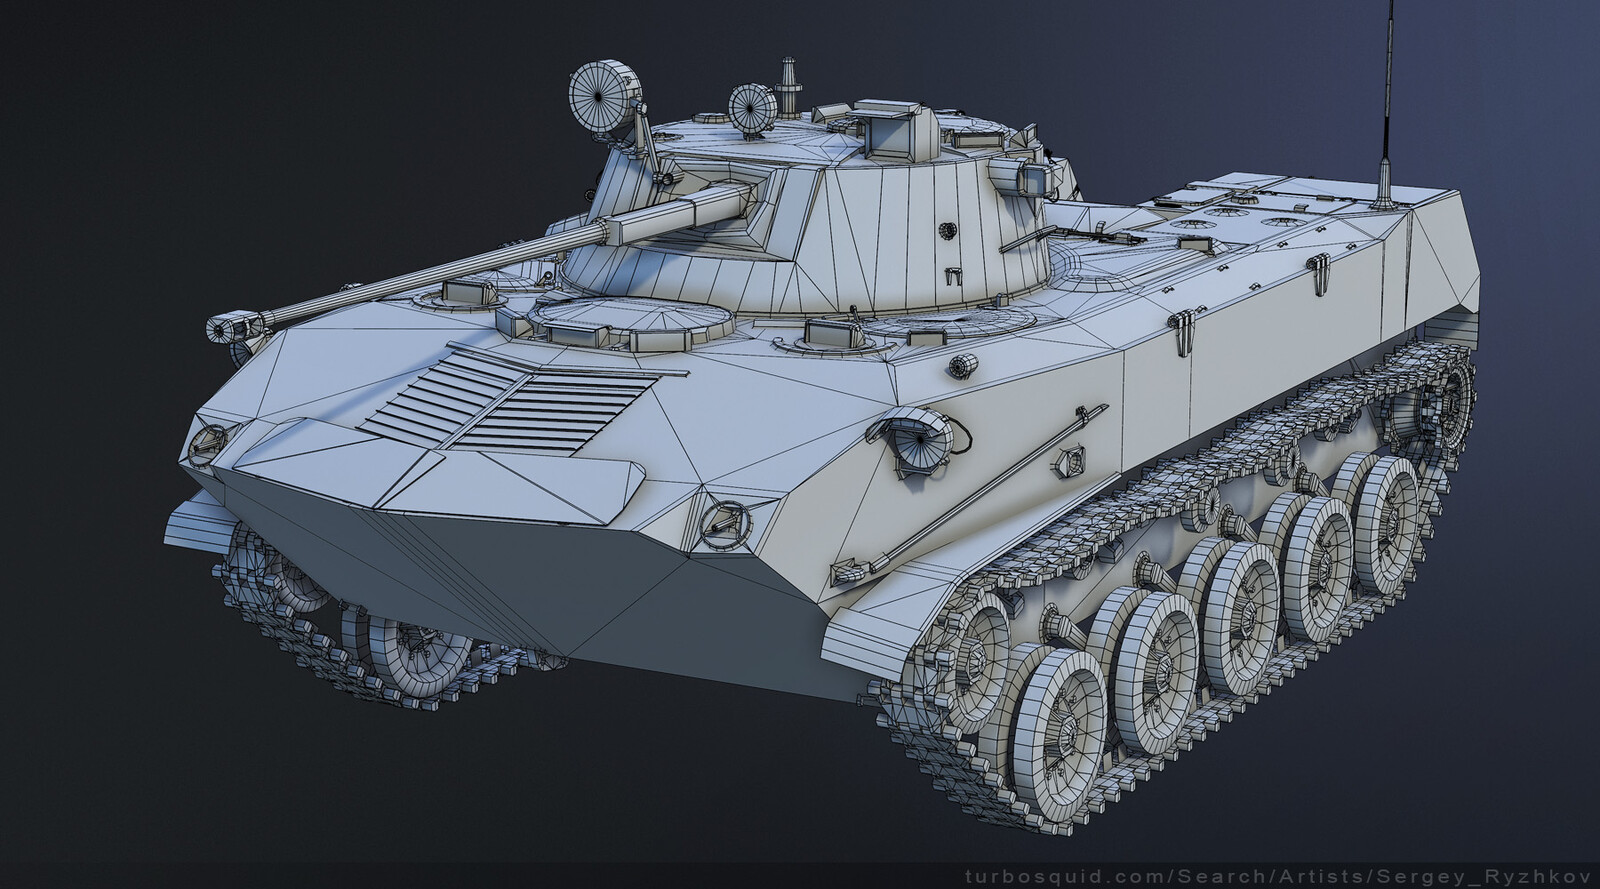 Polycount without tracks:
Polys: 40 891
Tris: 72 081
Verts: 41 694